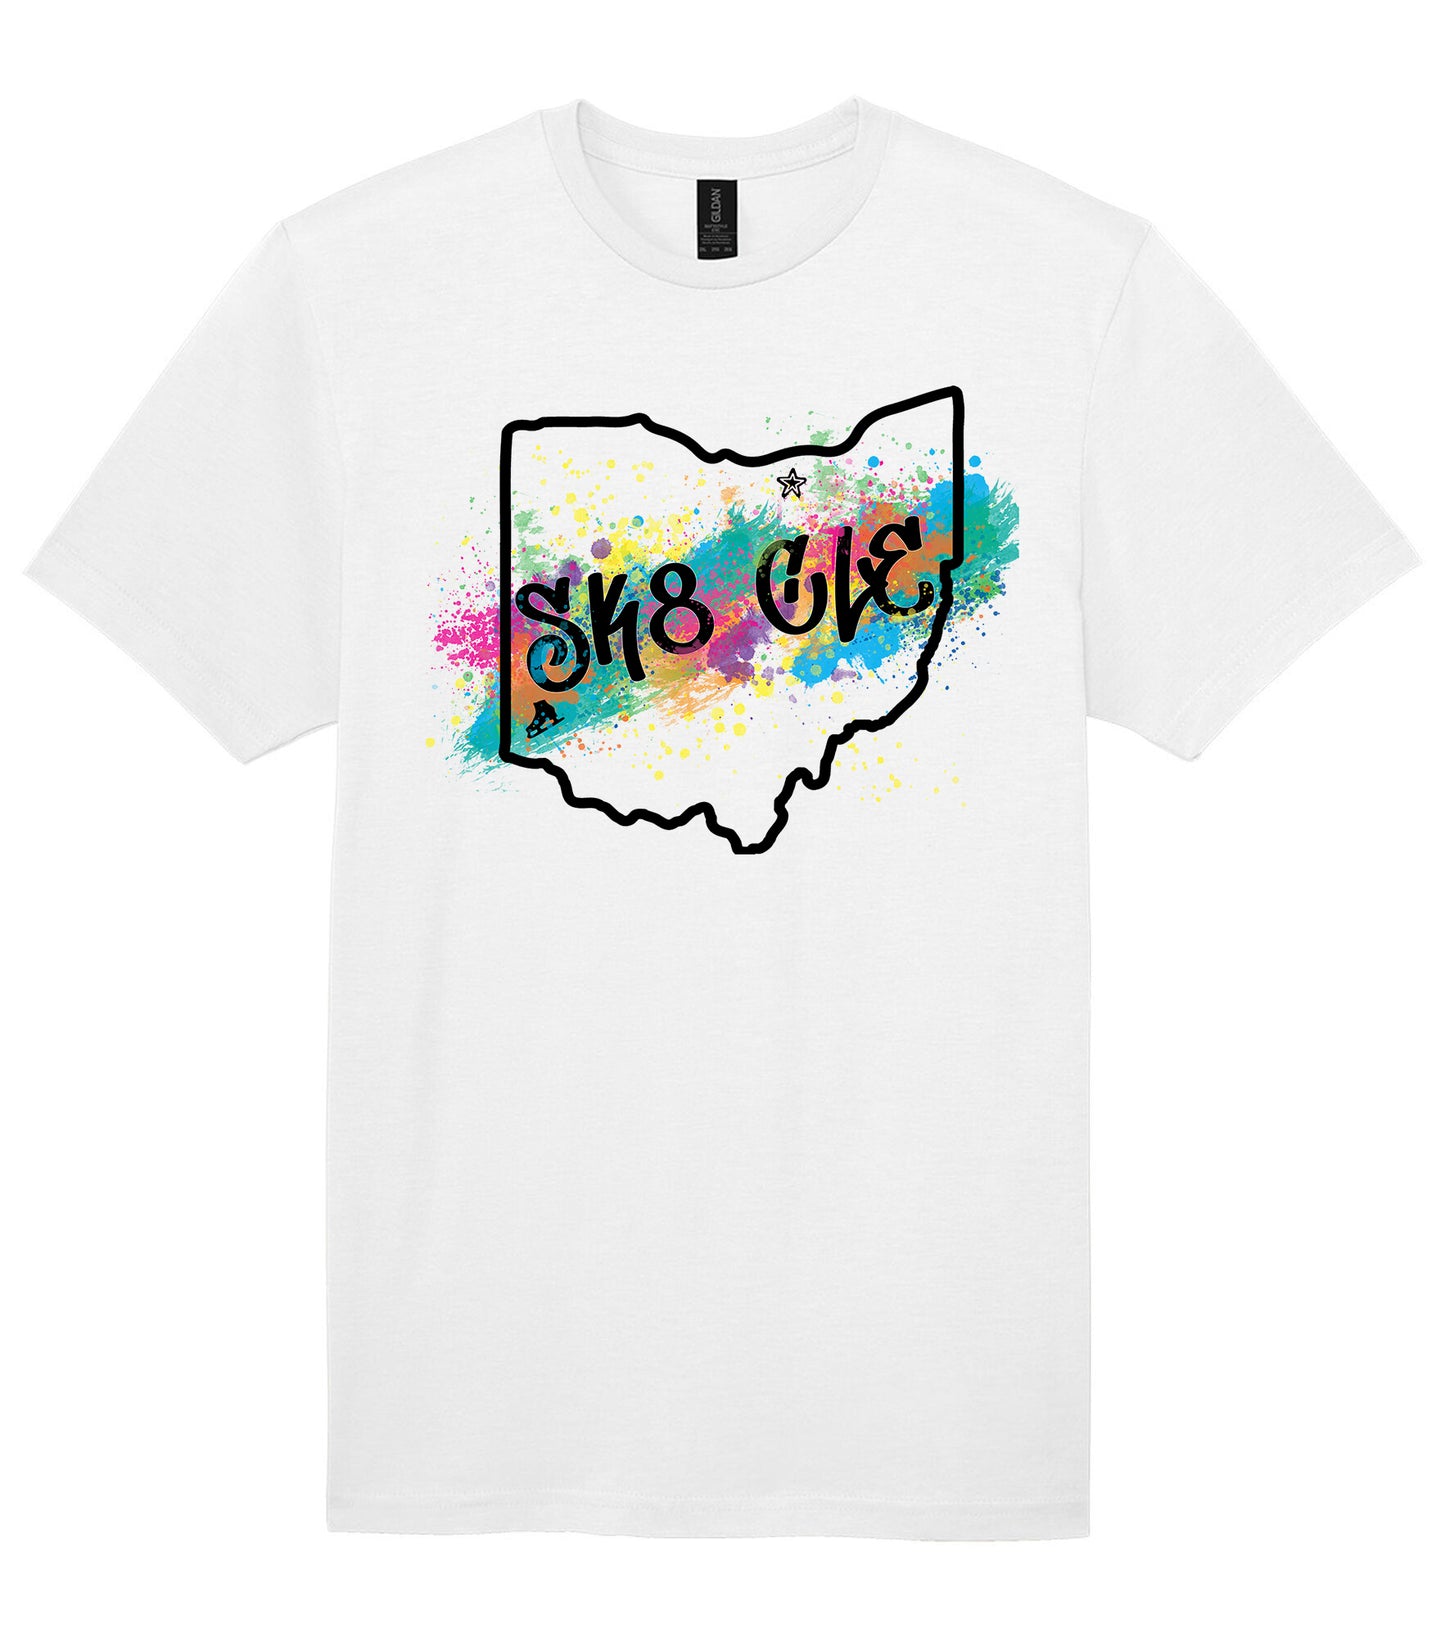 SK8 CLE White T- Shirt - Available in youth and Adult